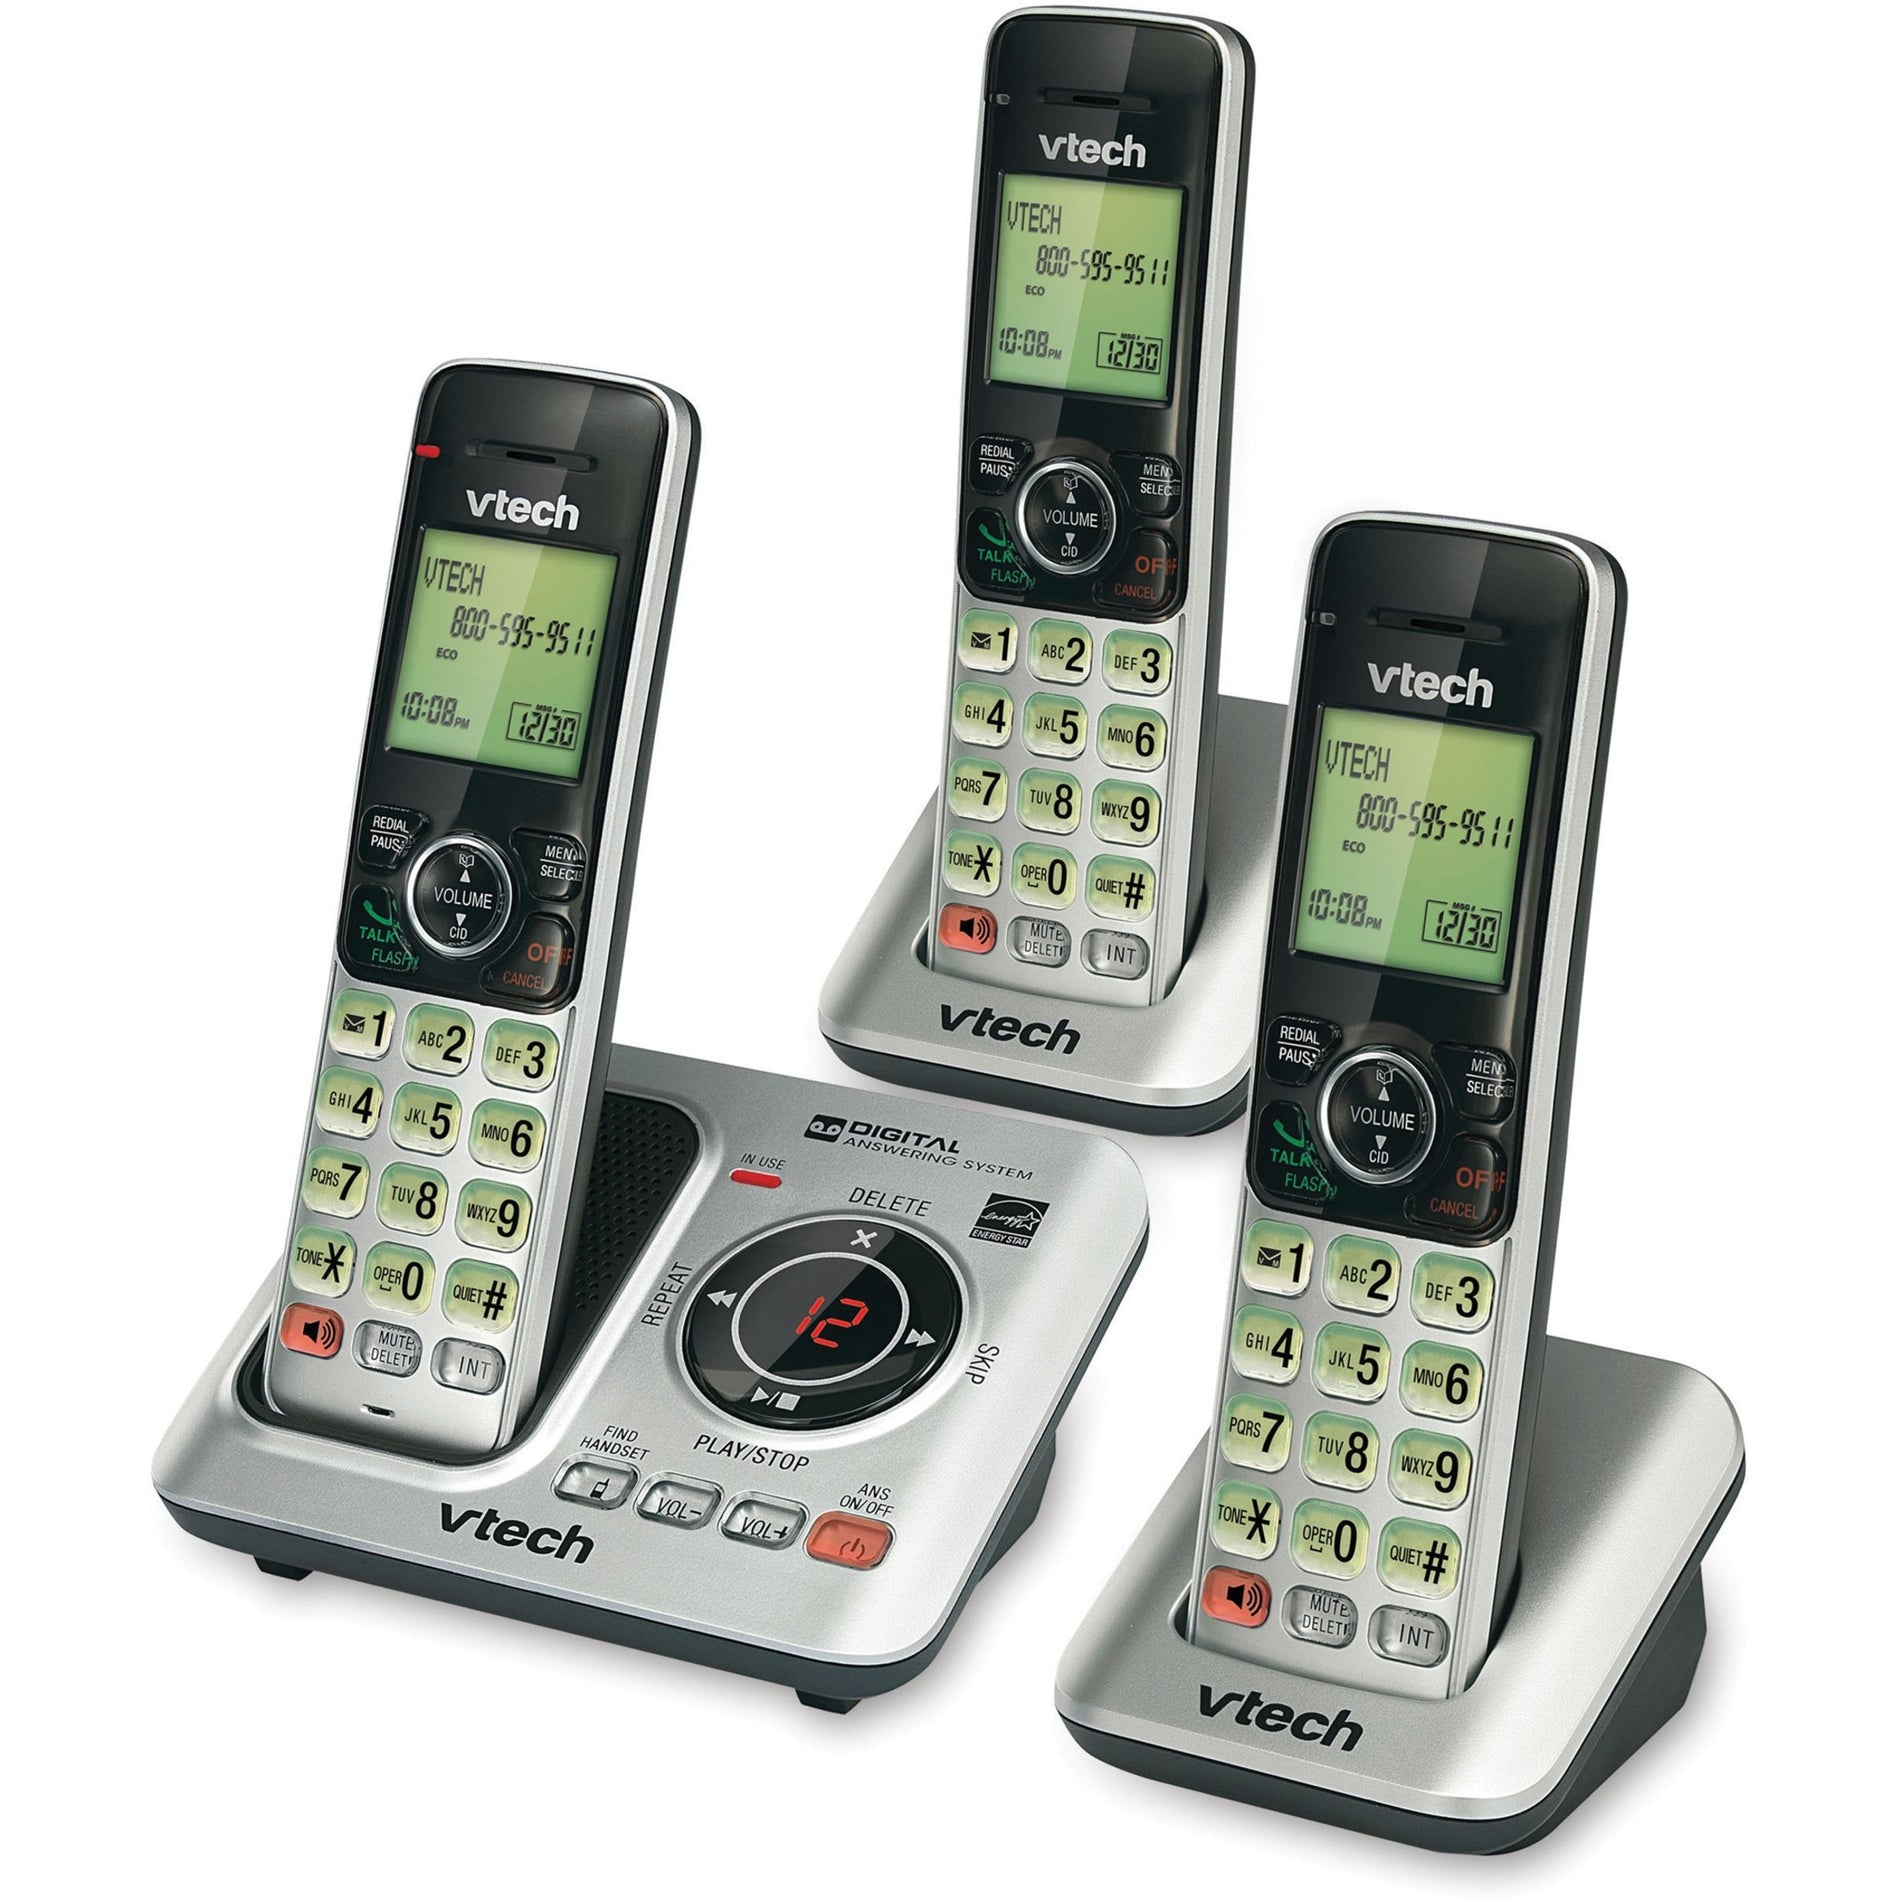 VTech CS6629-3 DECT 6.0 Cordless Phone - 3 Handset Answering System with Caller ID/Call Waiting [Discontinued]